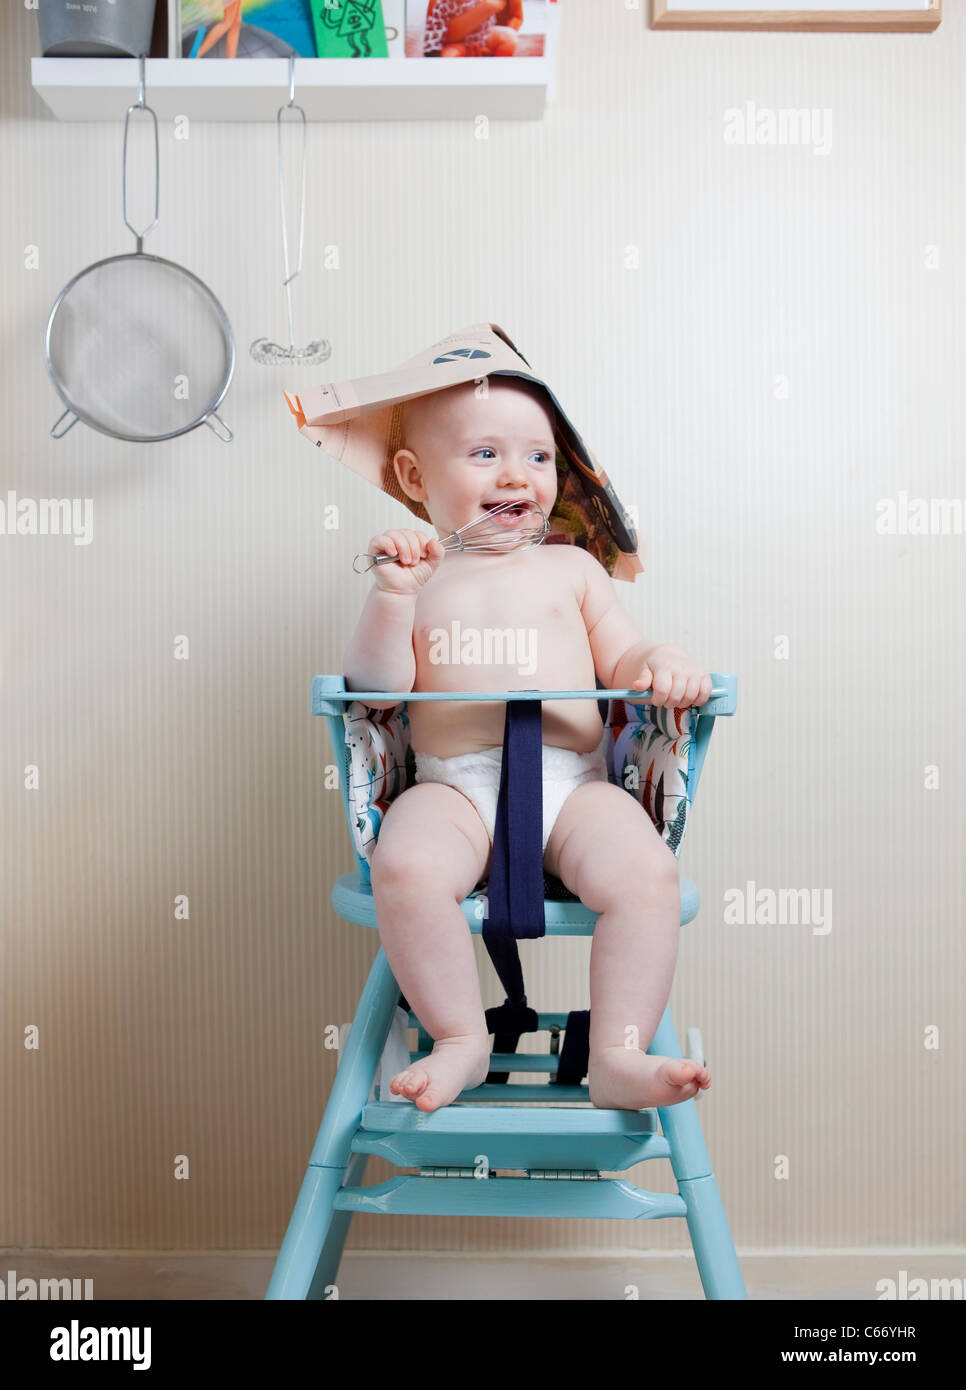 6 month old baby sitting chair